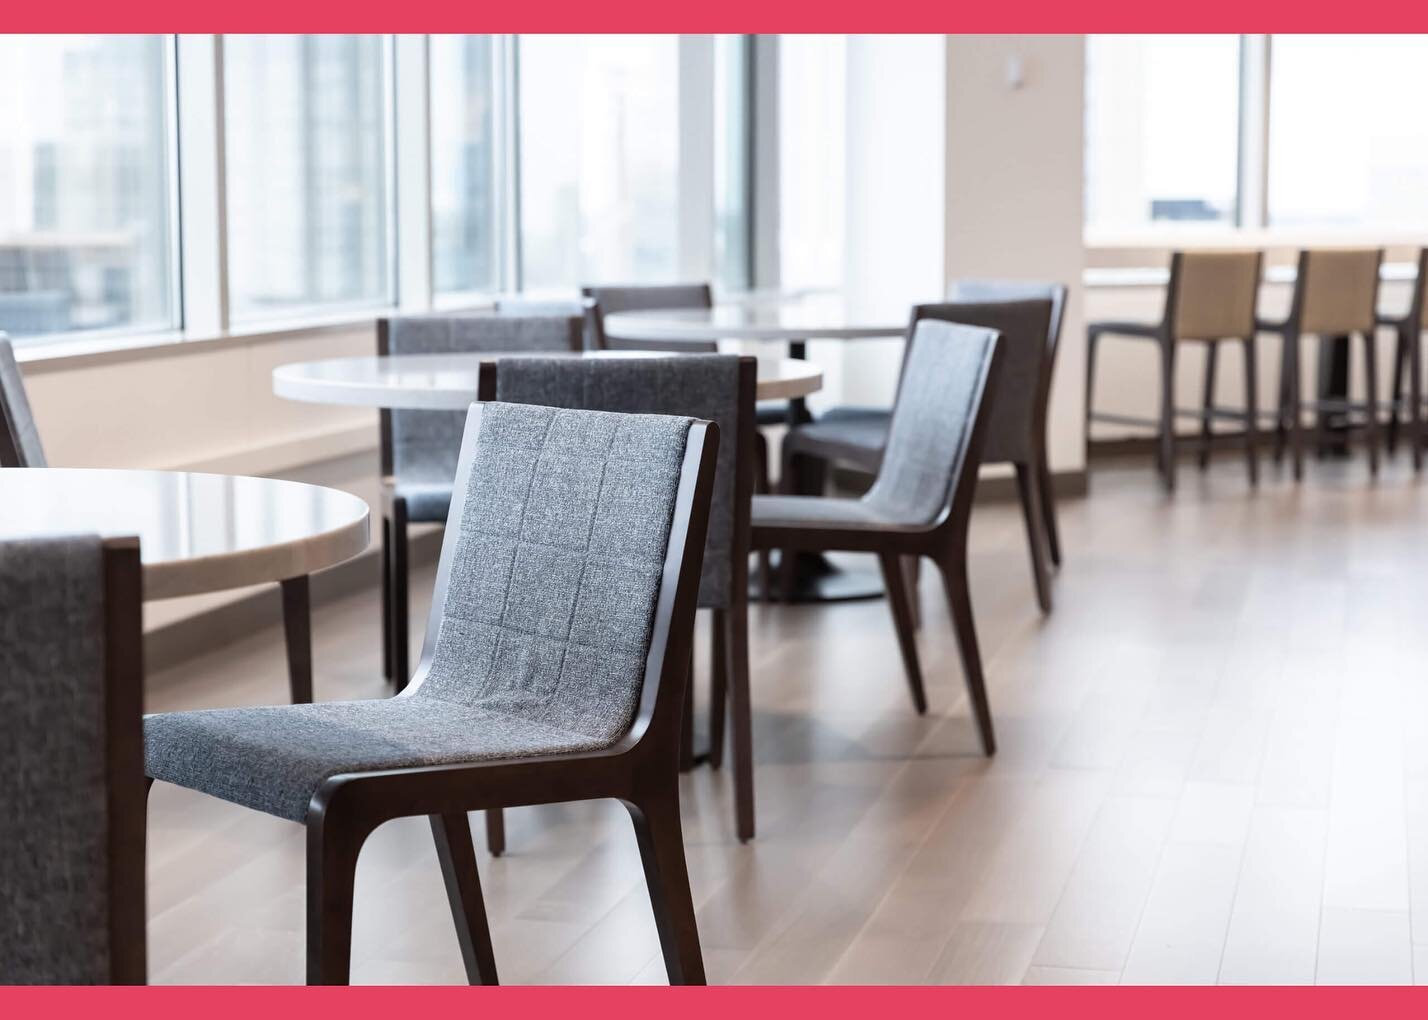 Showing off some of our favorite OFS products with @atmosphere_ci's portfolio gallery!
 
Products such as the Modello chairs and stools, Heya pod and Riff table are perfect for your collaborative or secluded workspace. Check out @ofs to learn more ab